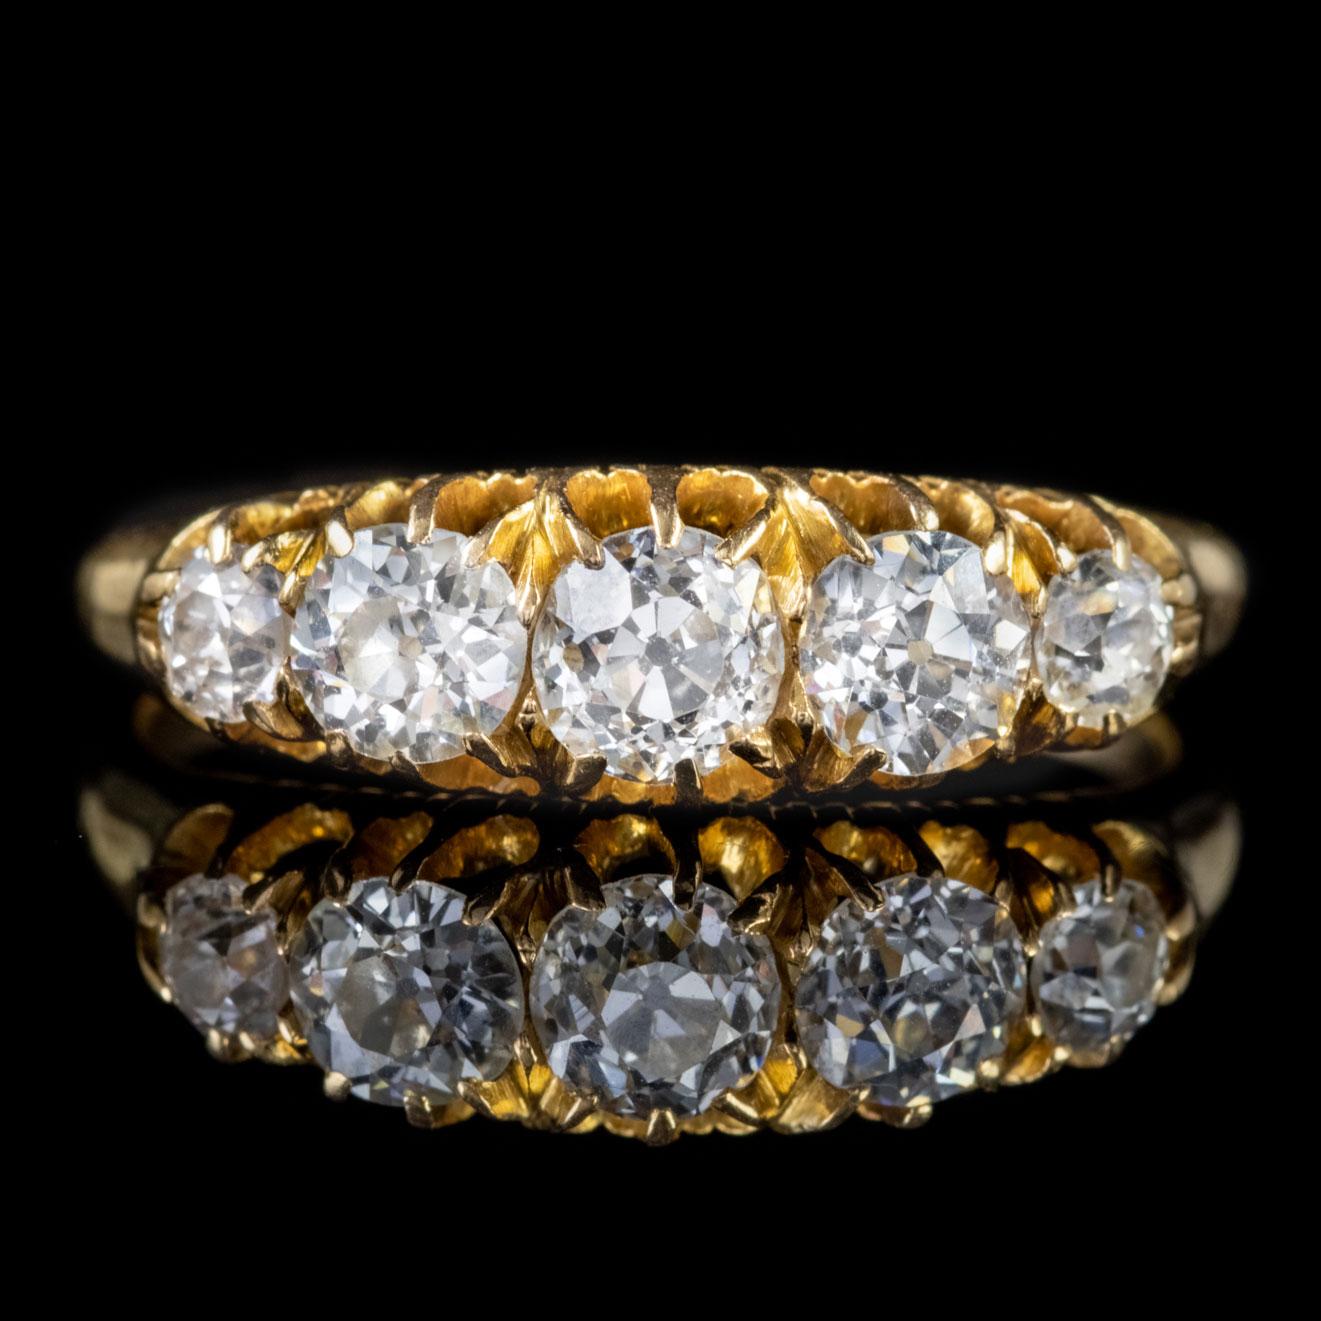 A striking Antique late-Victorian ring crafted in solid 18ct Yellow Gold and lined with five stunning claw set old European cut Diamonds which boast a clean, bright sparkle with VS1 clarity and H colour. 

Old Cut Diamonds have many facets which are